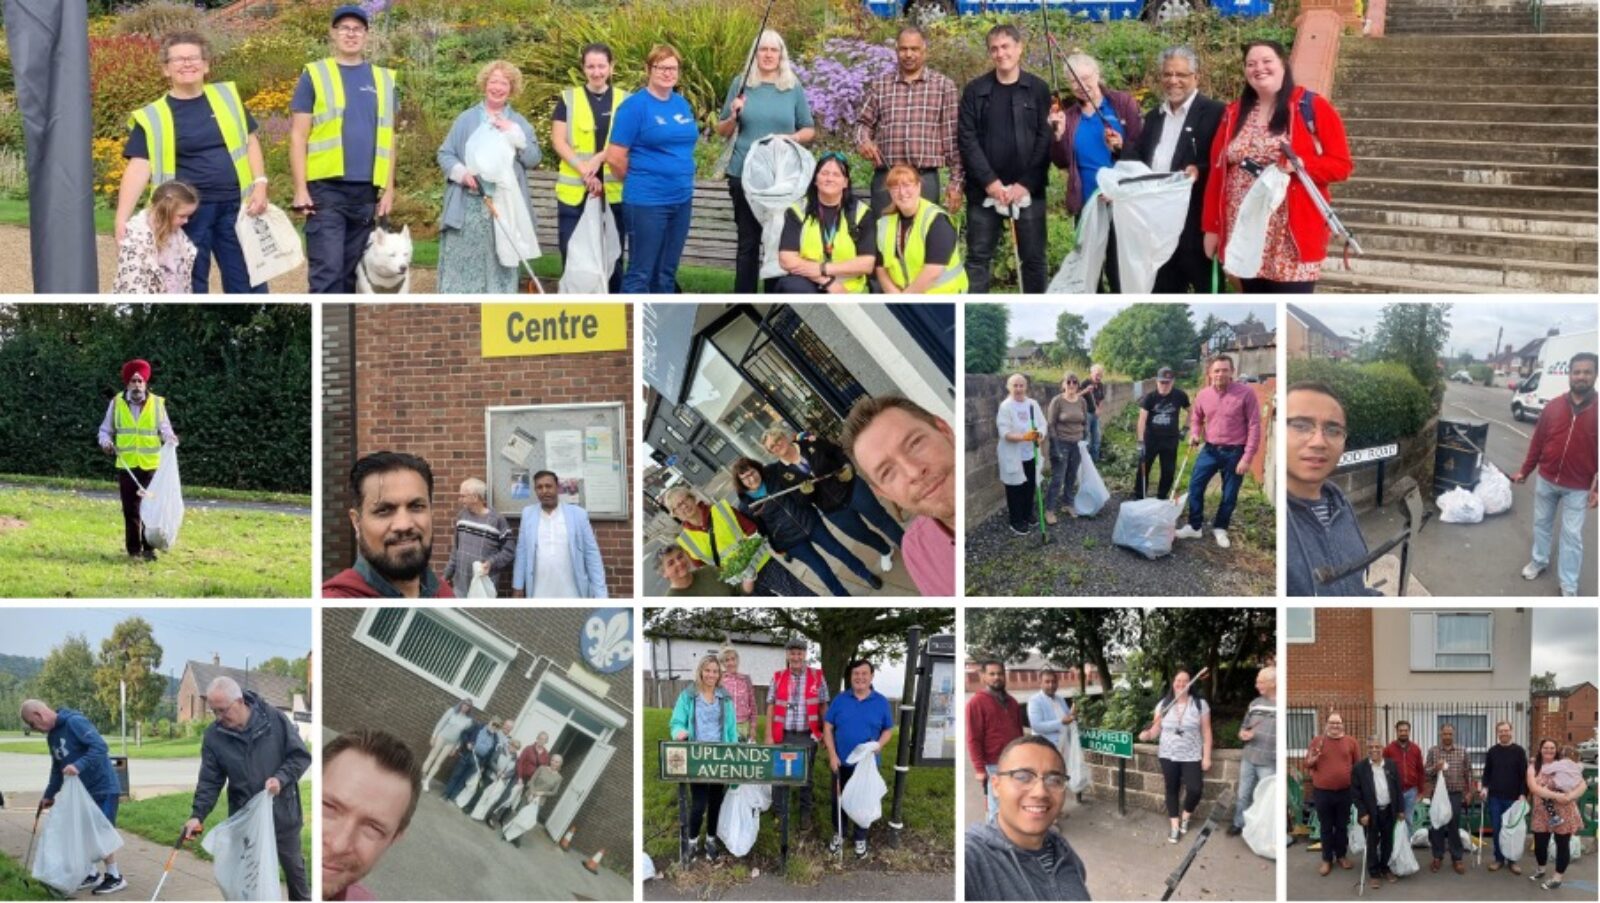 Communities across Stoke-on-Trent unite on World Clean-up Day